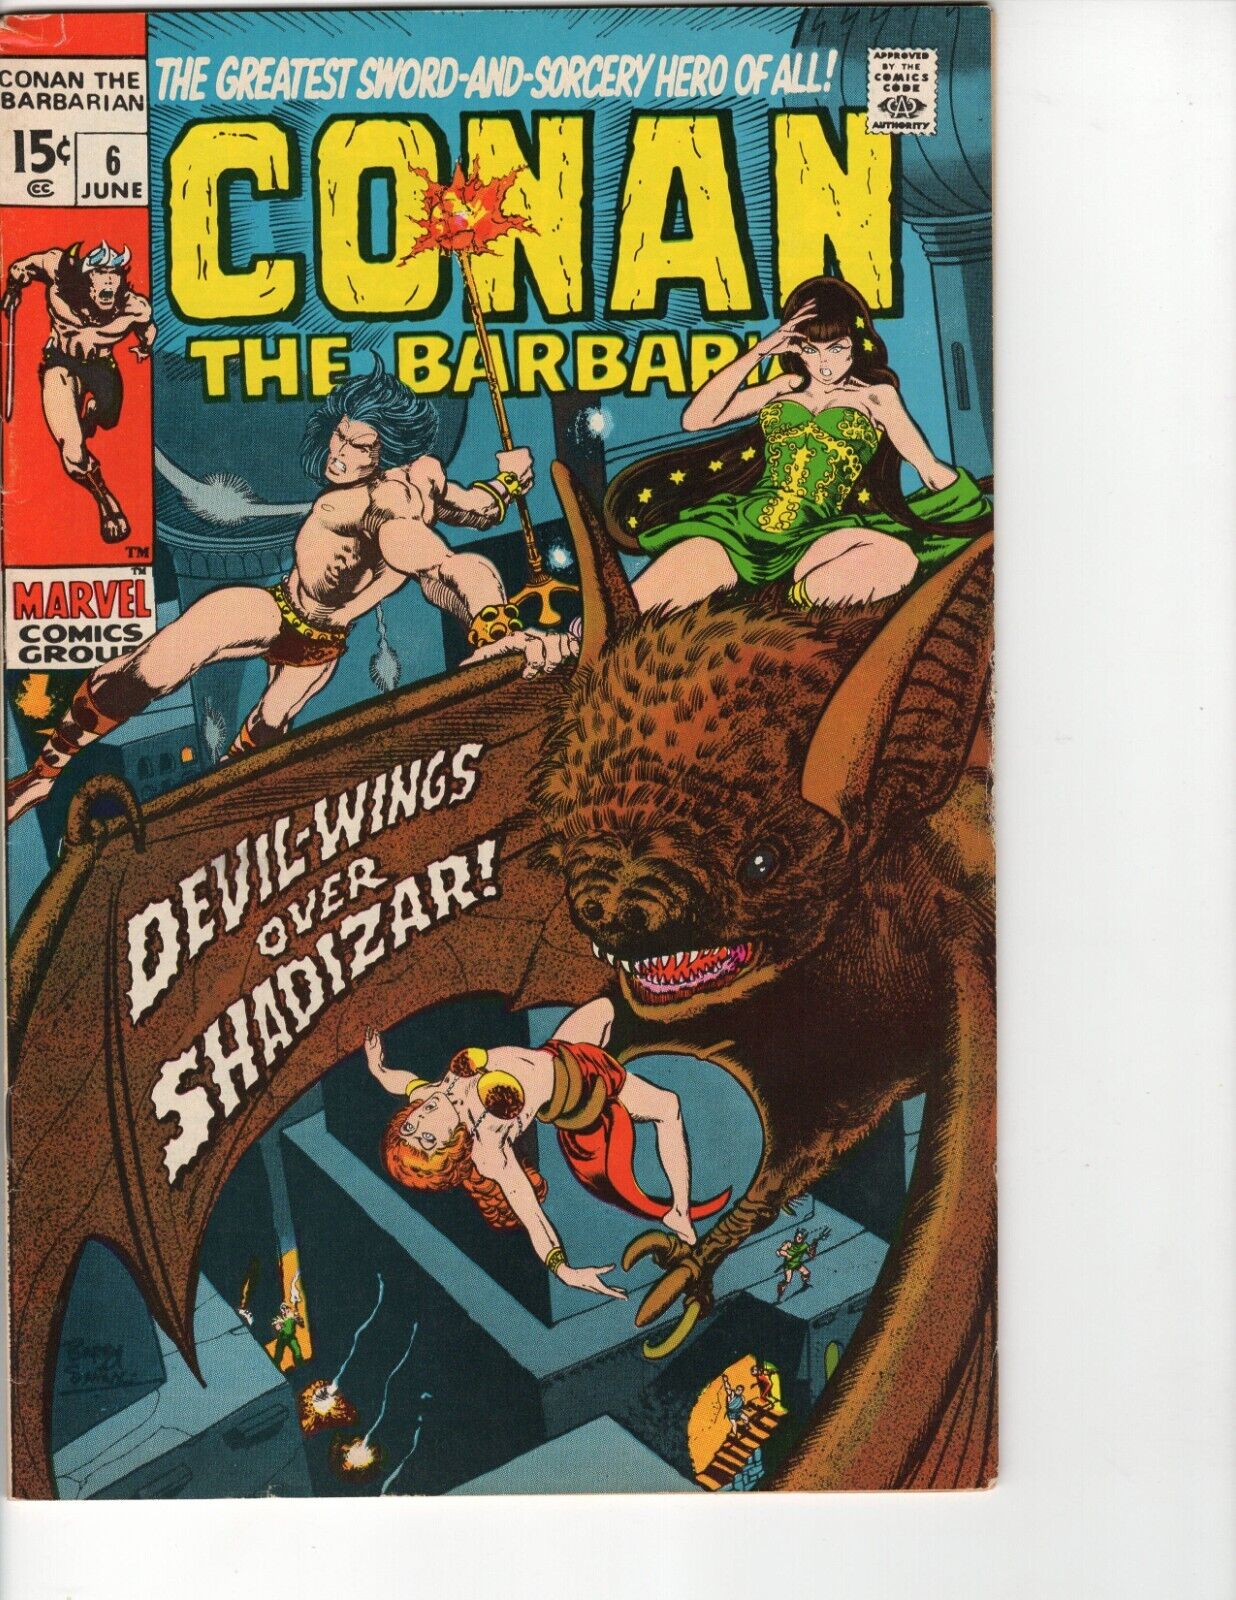 CONAN #6 - 1971 Marvel - Has very good color and still lies flat.